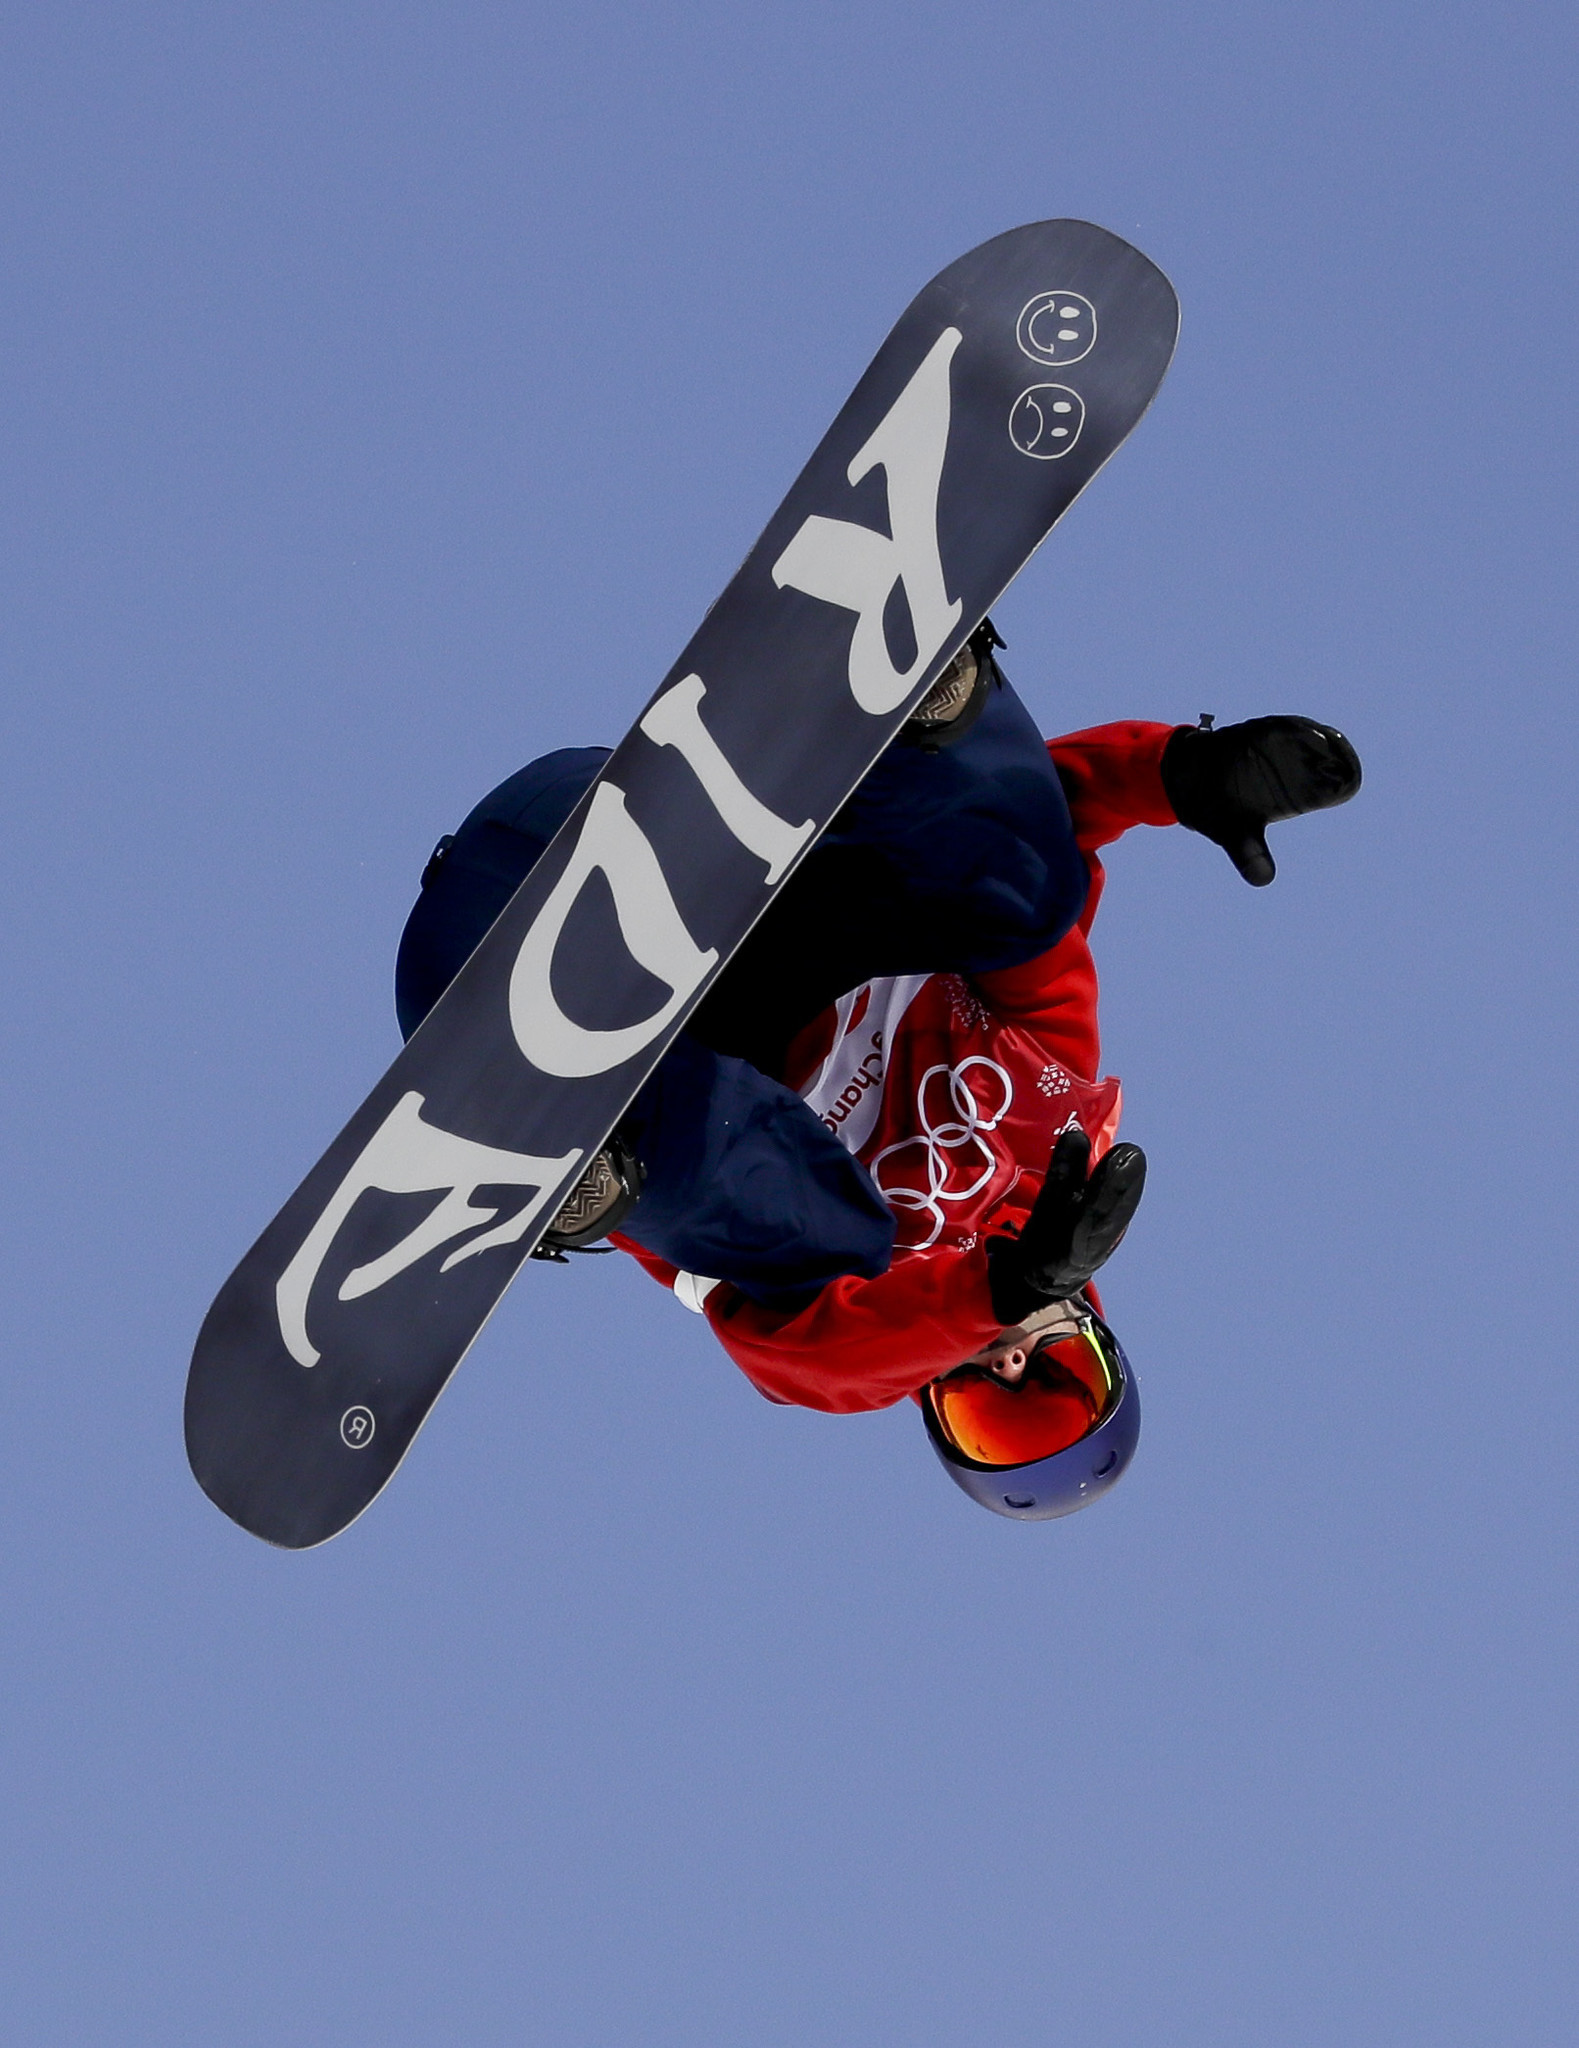 olympics-new-big-air-snowboarding-takes-sports-to-a-new-extreme-even